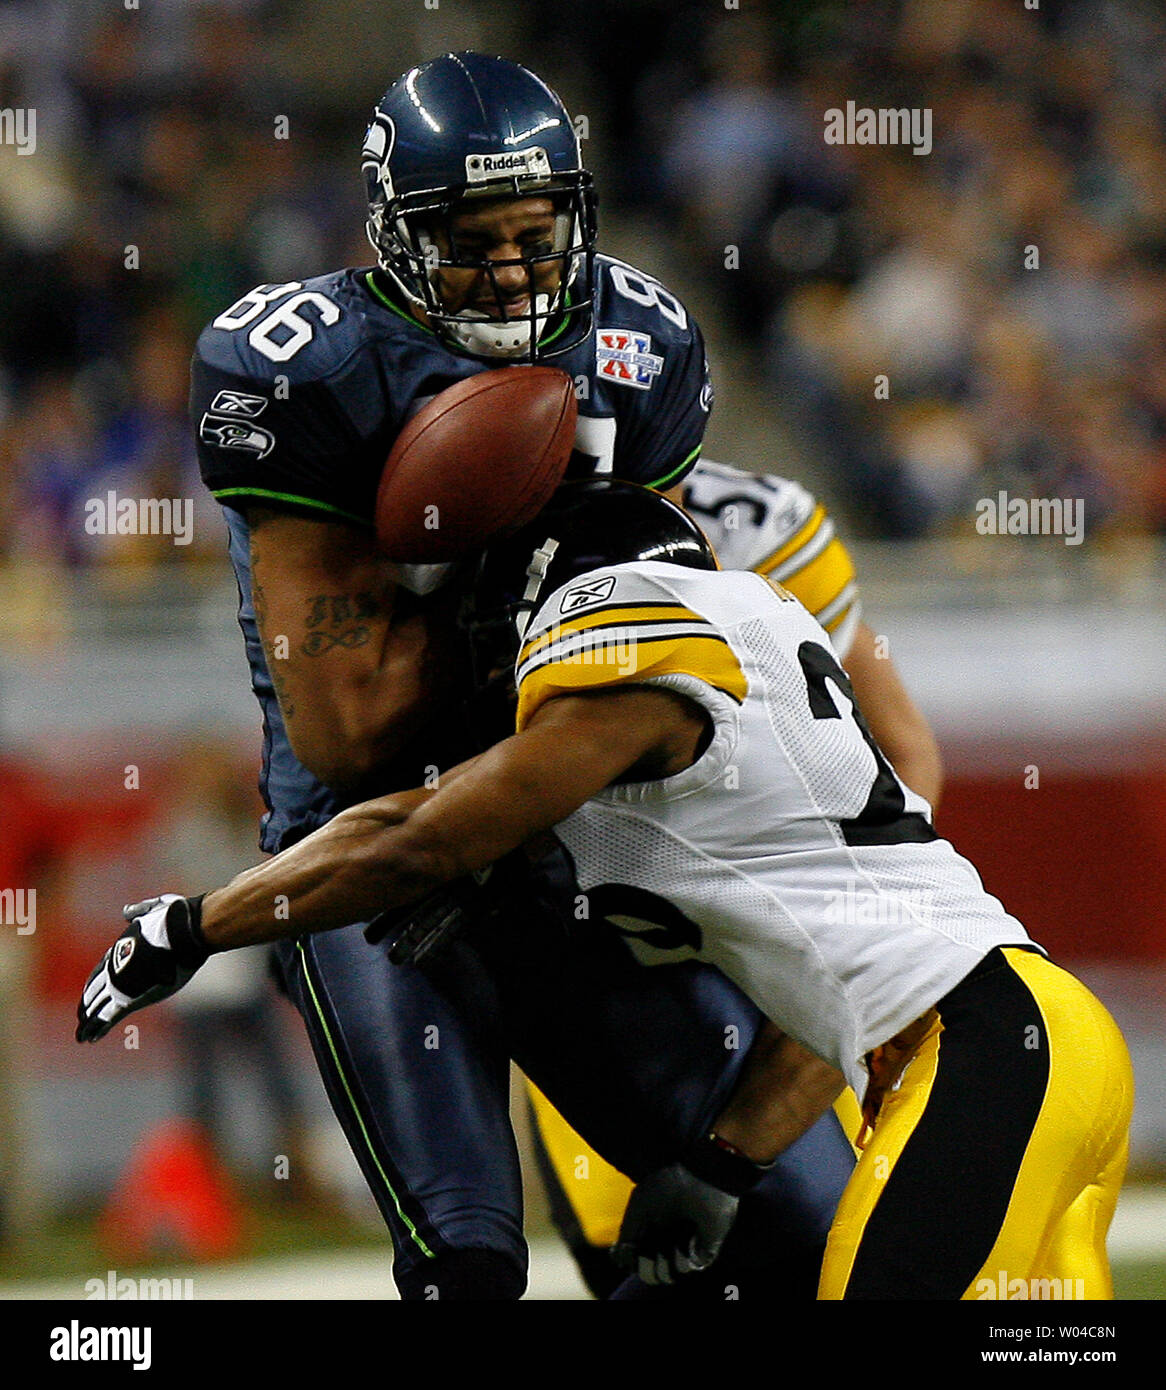 Jerramy Stevens of the Seattle Seahawks drops the pass as he is tackled by Pittsburgh Steelers safety Chris Hope in the second half of Super Bowl XL featuring the Seattle Seahawks and the Pittsburgh Steelers at Ford Field in Detroit, Mi., on February 5, 2006.  (UPI Photo/John Angelillo) Stock Photo